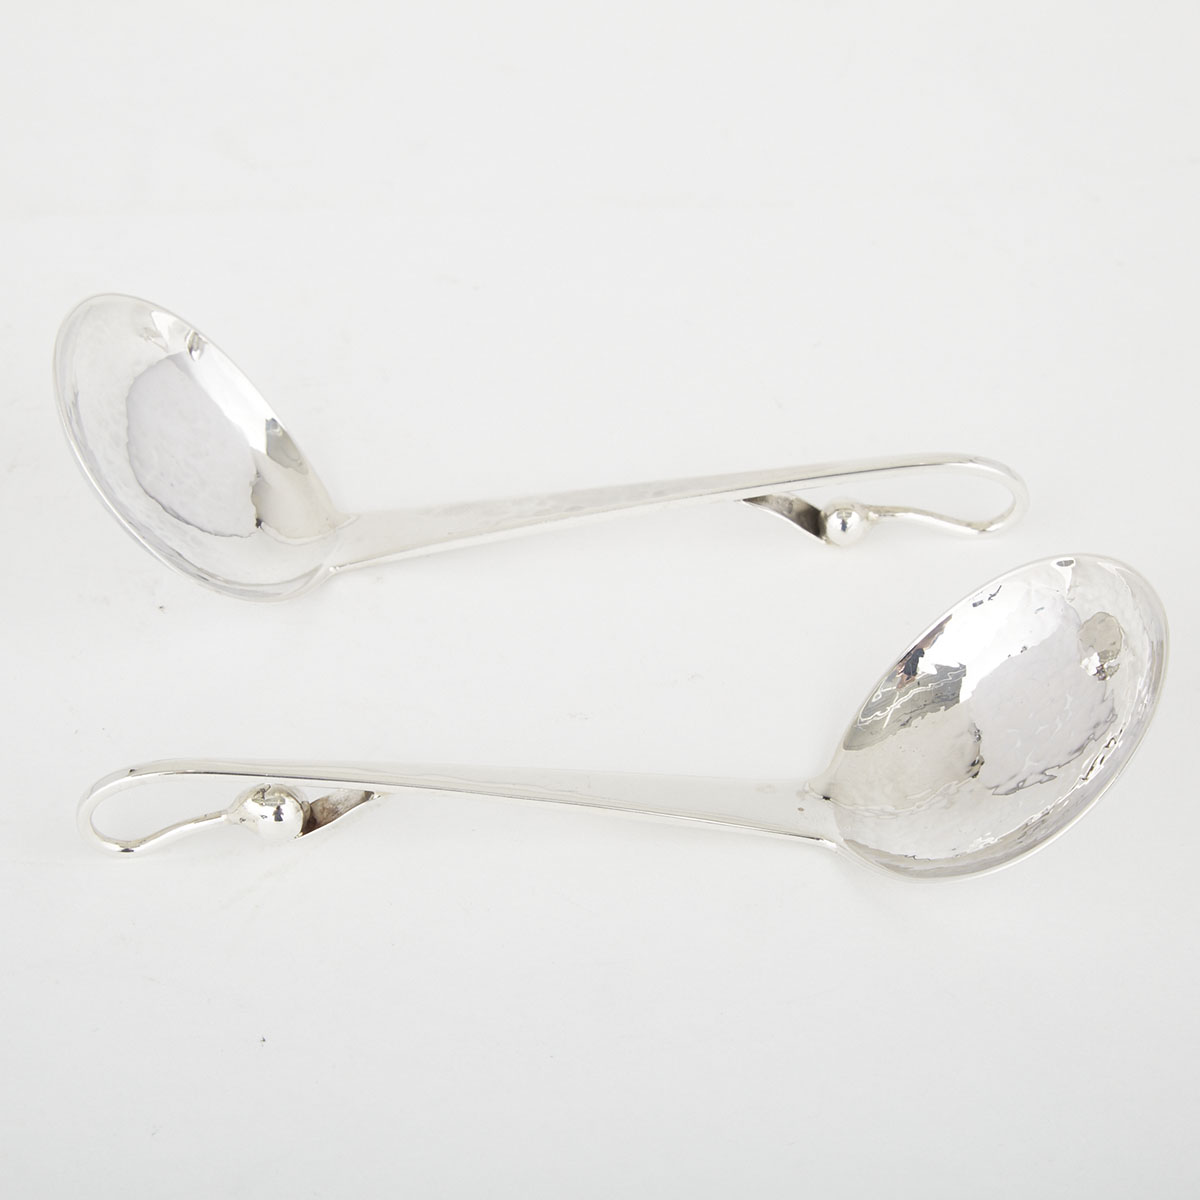 Pair of Canadian Silver Sauce Ladles, Carl Poul Petersen, Montreal, Que., mid-20th century